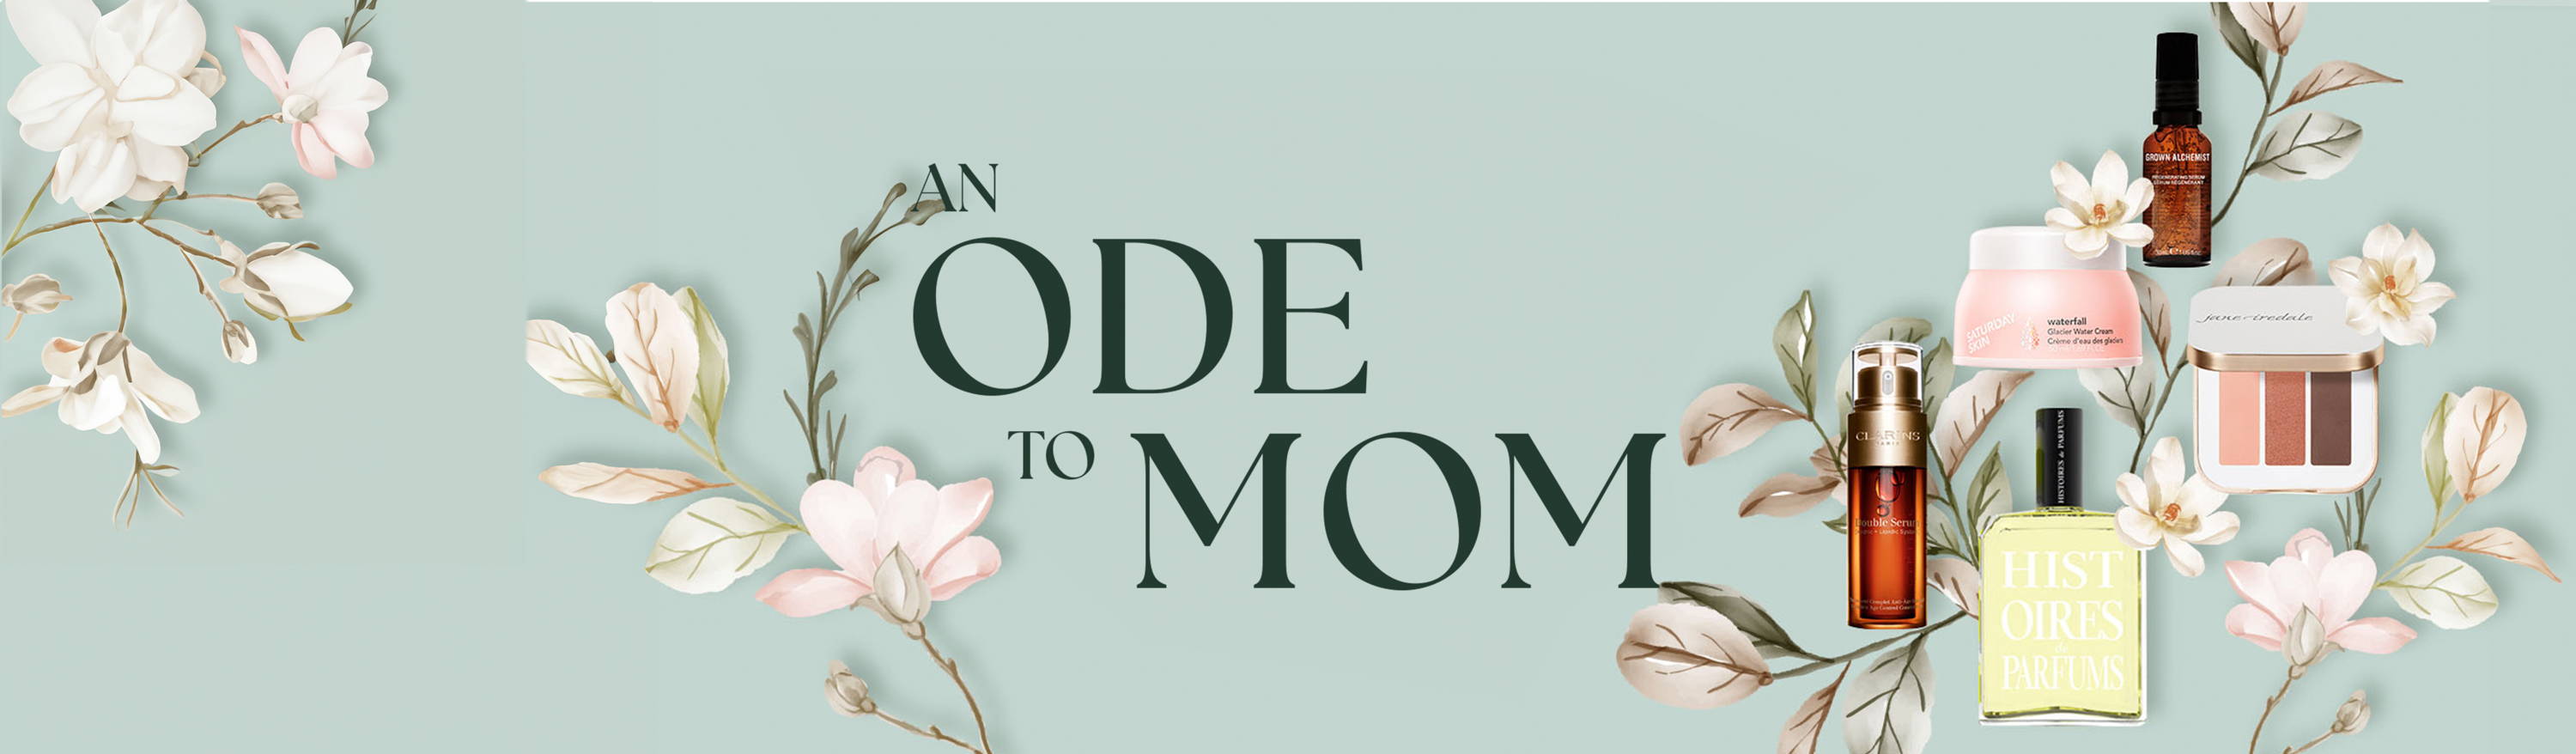 Rustan's The Beauty Source presents: An ode to Mom